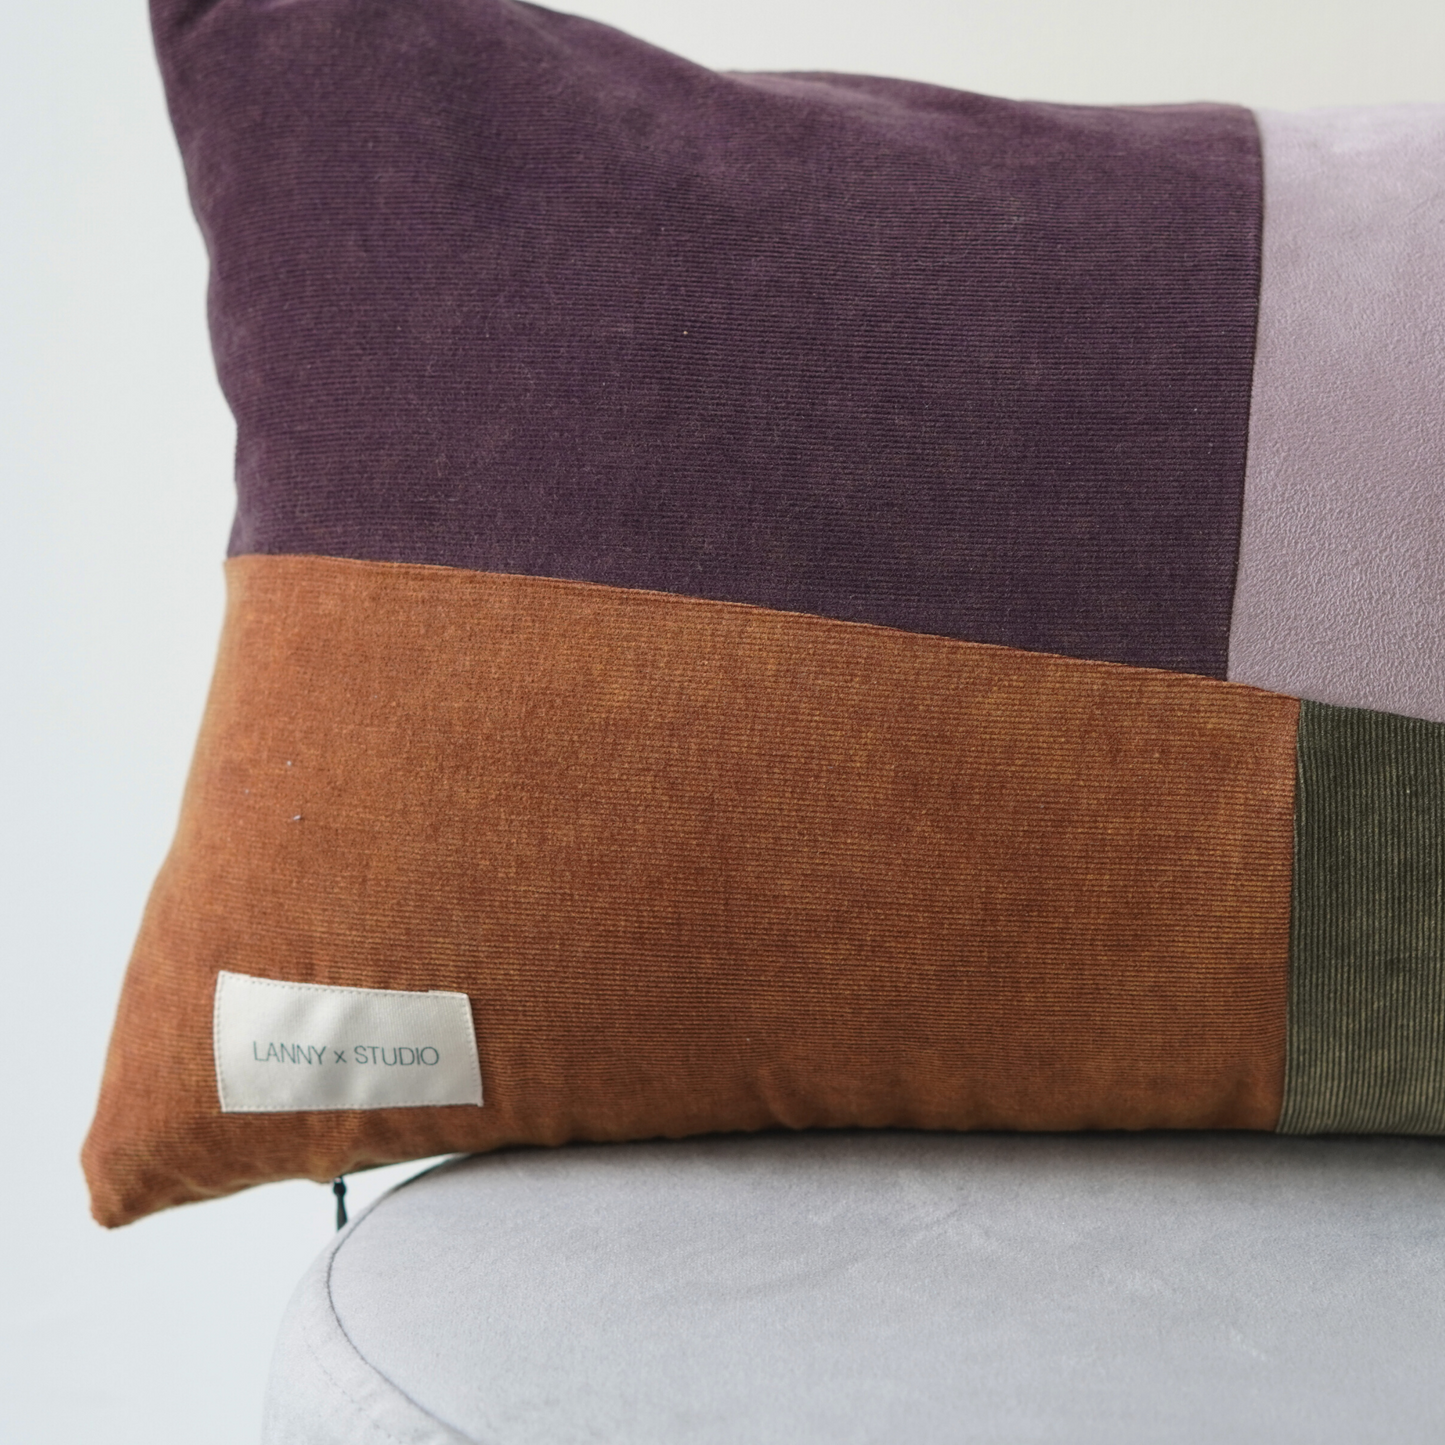 Orange, Purple, Green and Lilac panelled rentable cushion with branded LannyxStudio label. Close up view of orange and purple panels. 